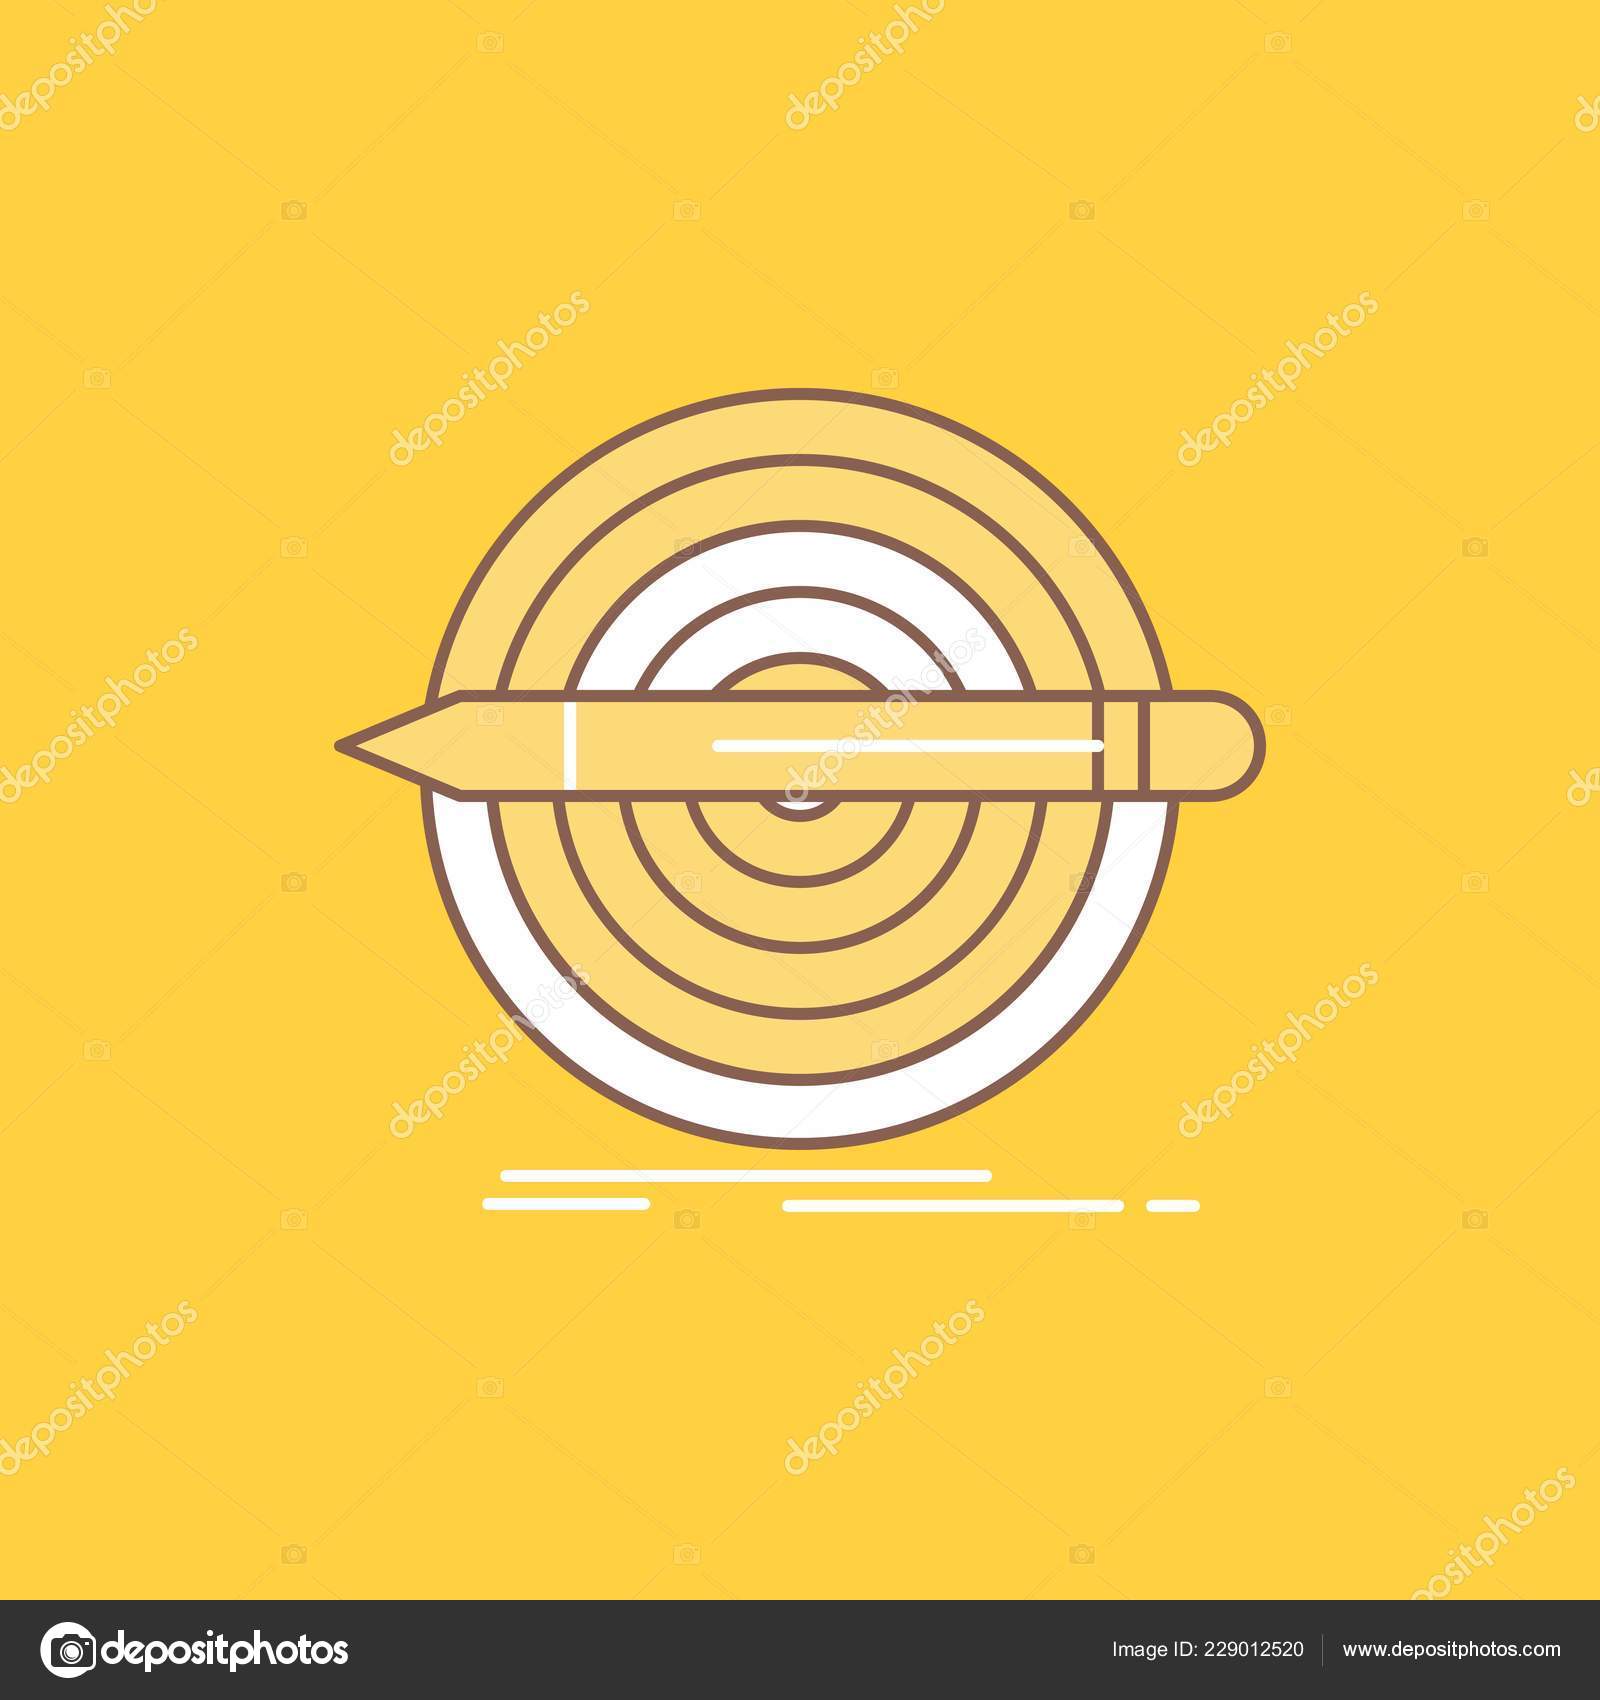 Design Goal Pencil Set Target Flat Line Filled Icon Beautiful Vector Image By C Flatart Vector Stock